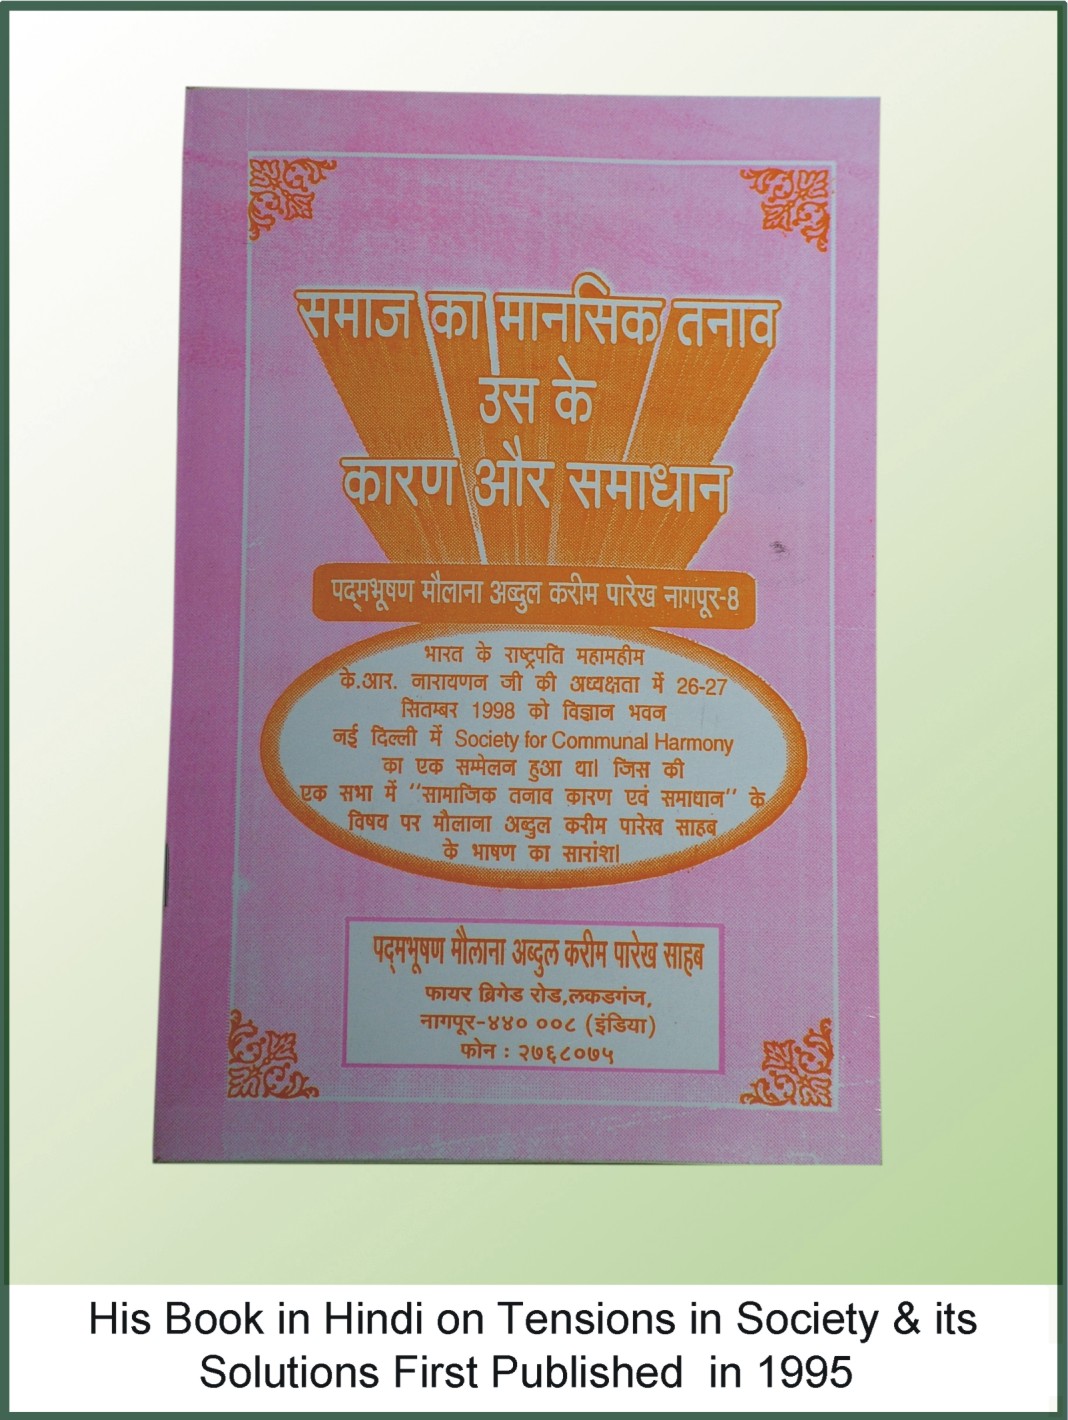 Tensions in Society & its Solutions (Hindi) First Publised in 1995